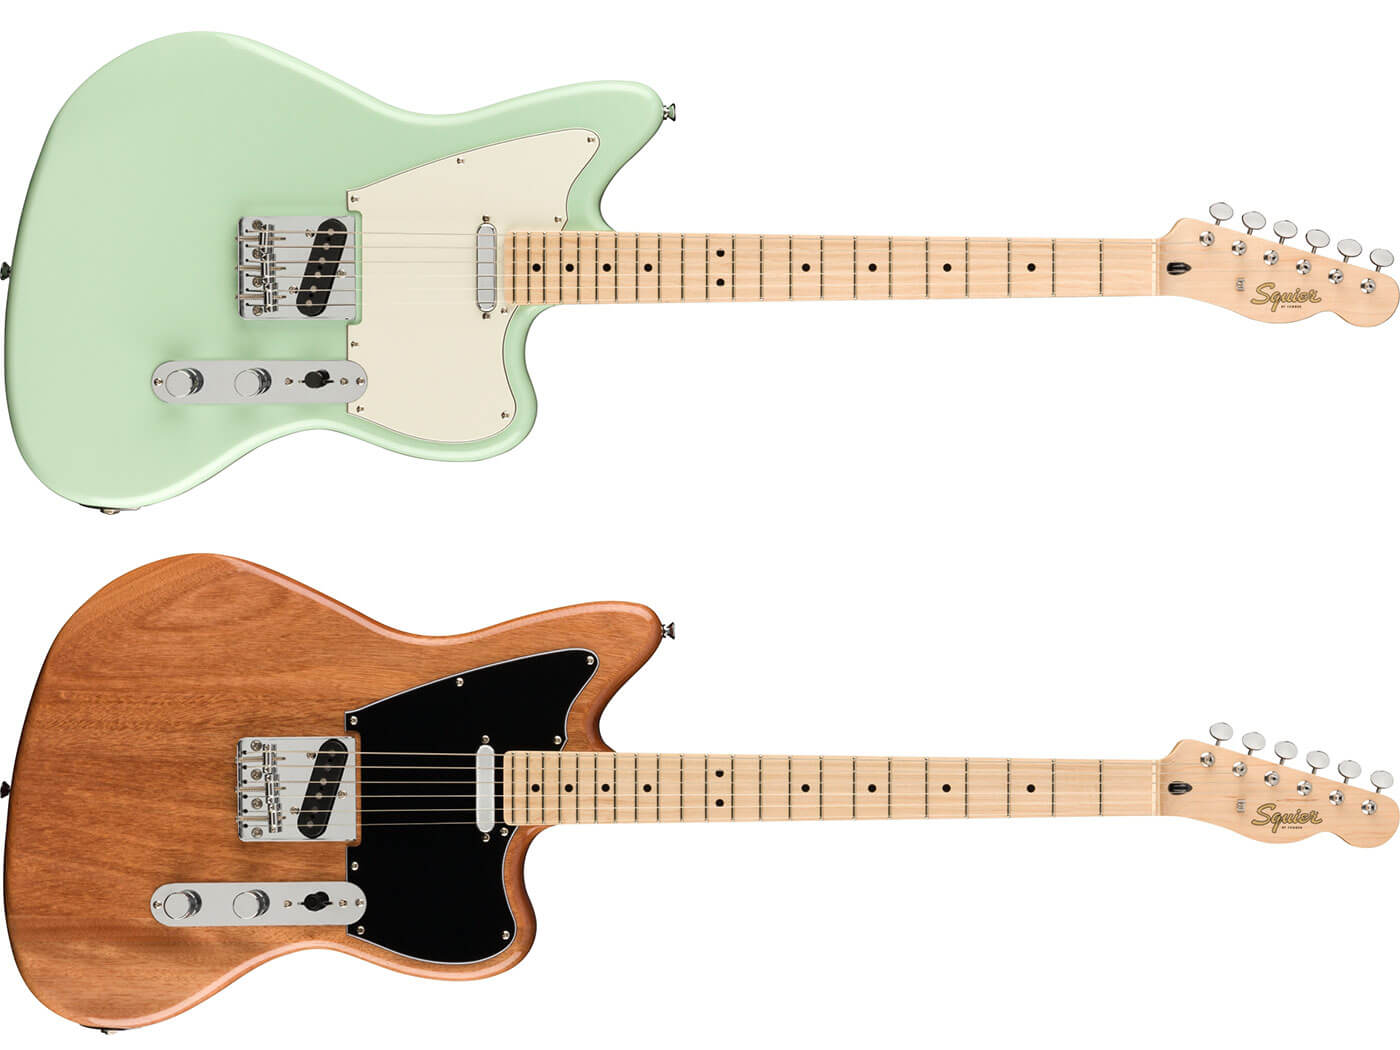 The Squier Paranormal Offset Telecaster